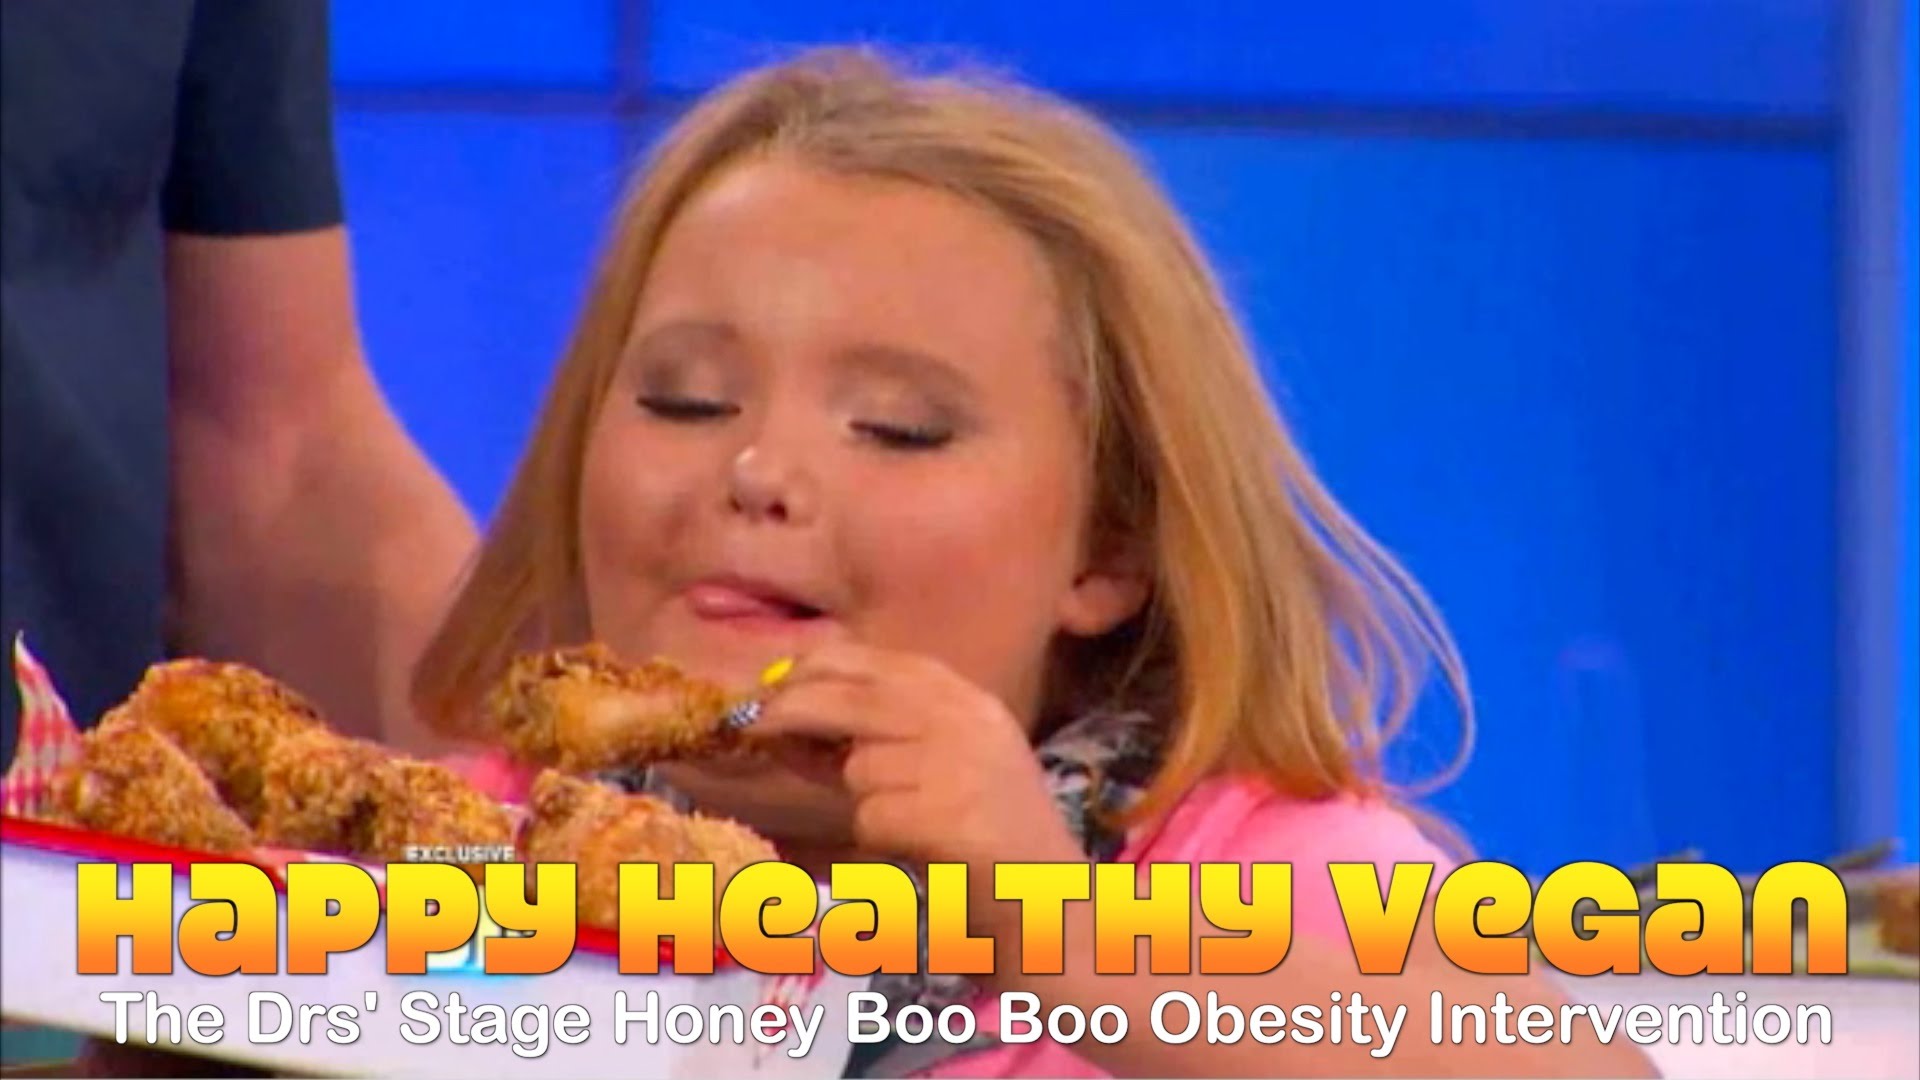 The Drs. Stage Honey Boo Boo Obesity Intervention